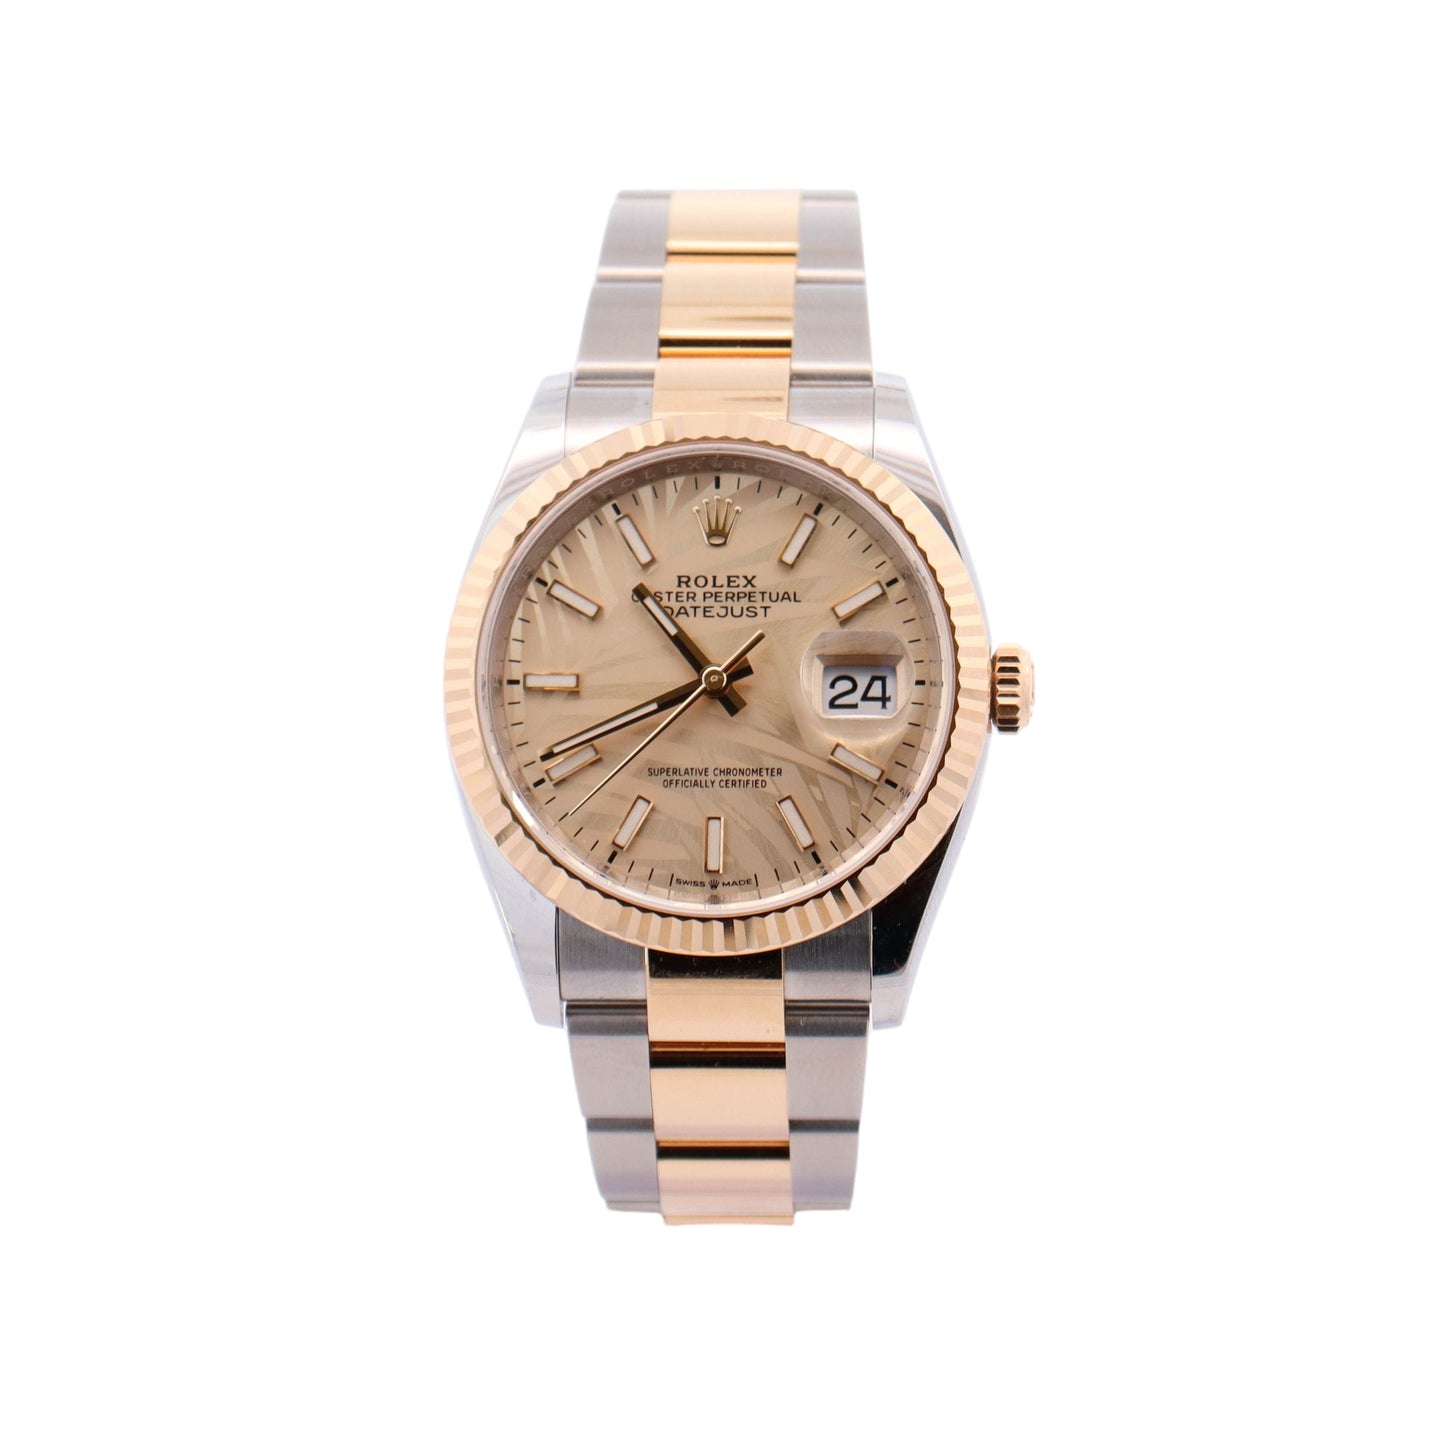 Rolex Datejust 36mm Yellow Gold & Stainless Steel Champagne Palm Stick Dial Watch Reference #: 126233 - Happy Jewelers Fine Jewelry Lifetime Warranty